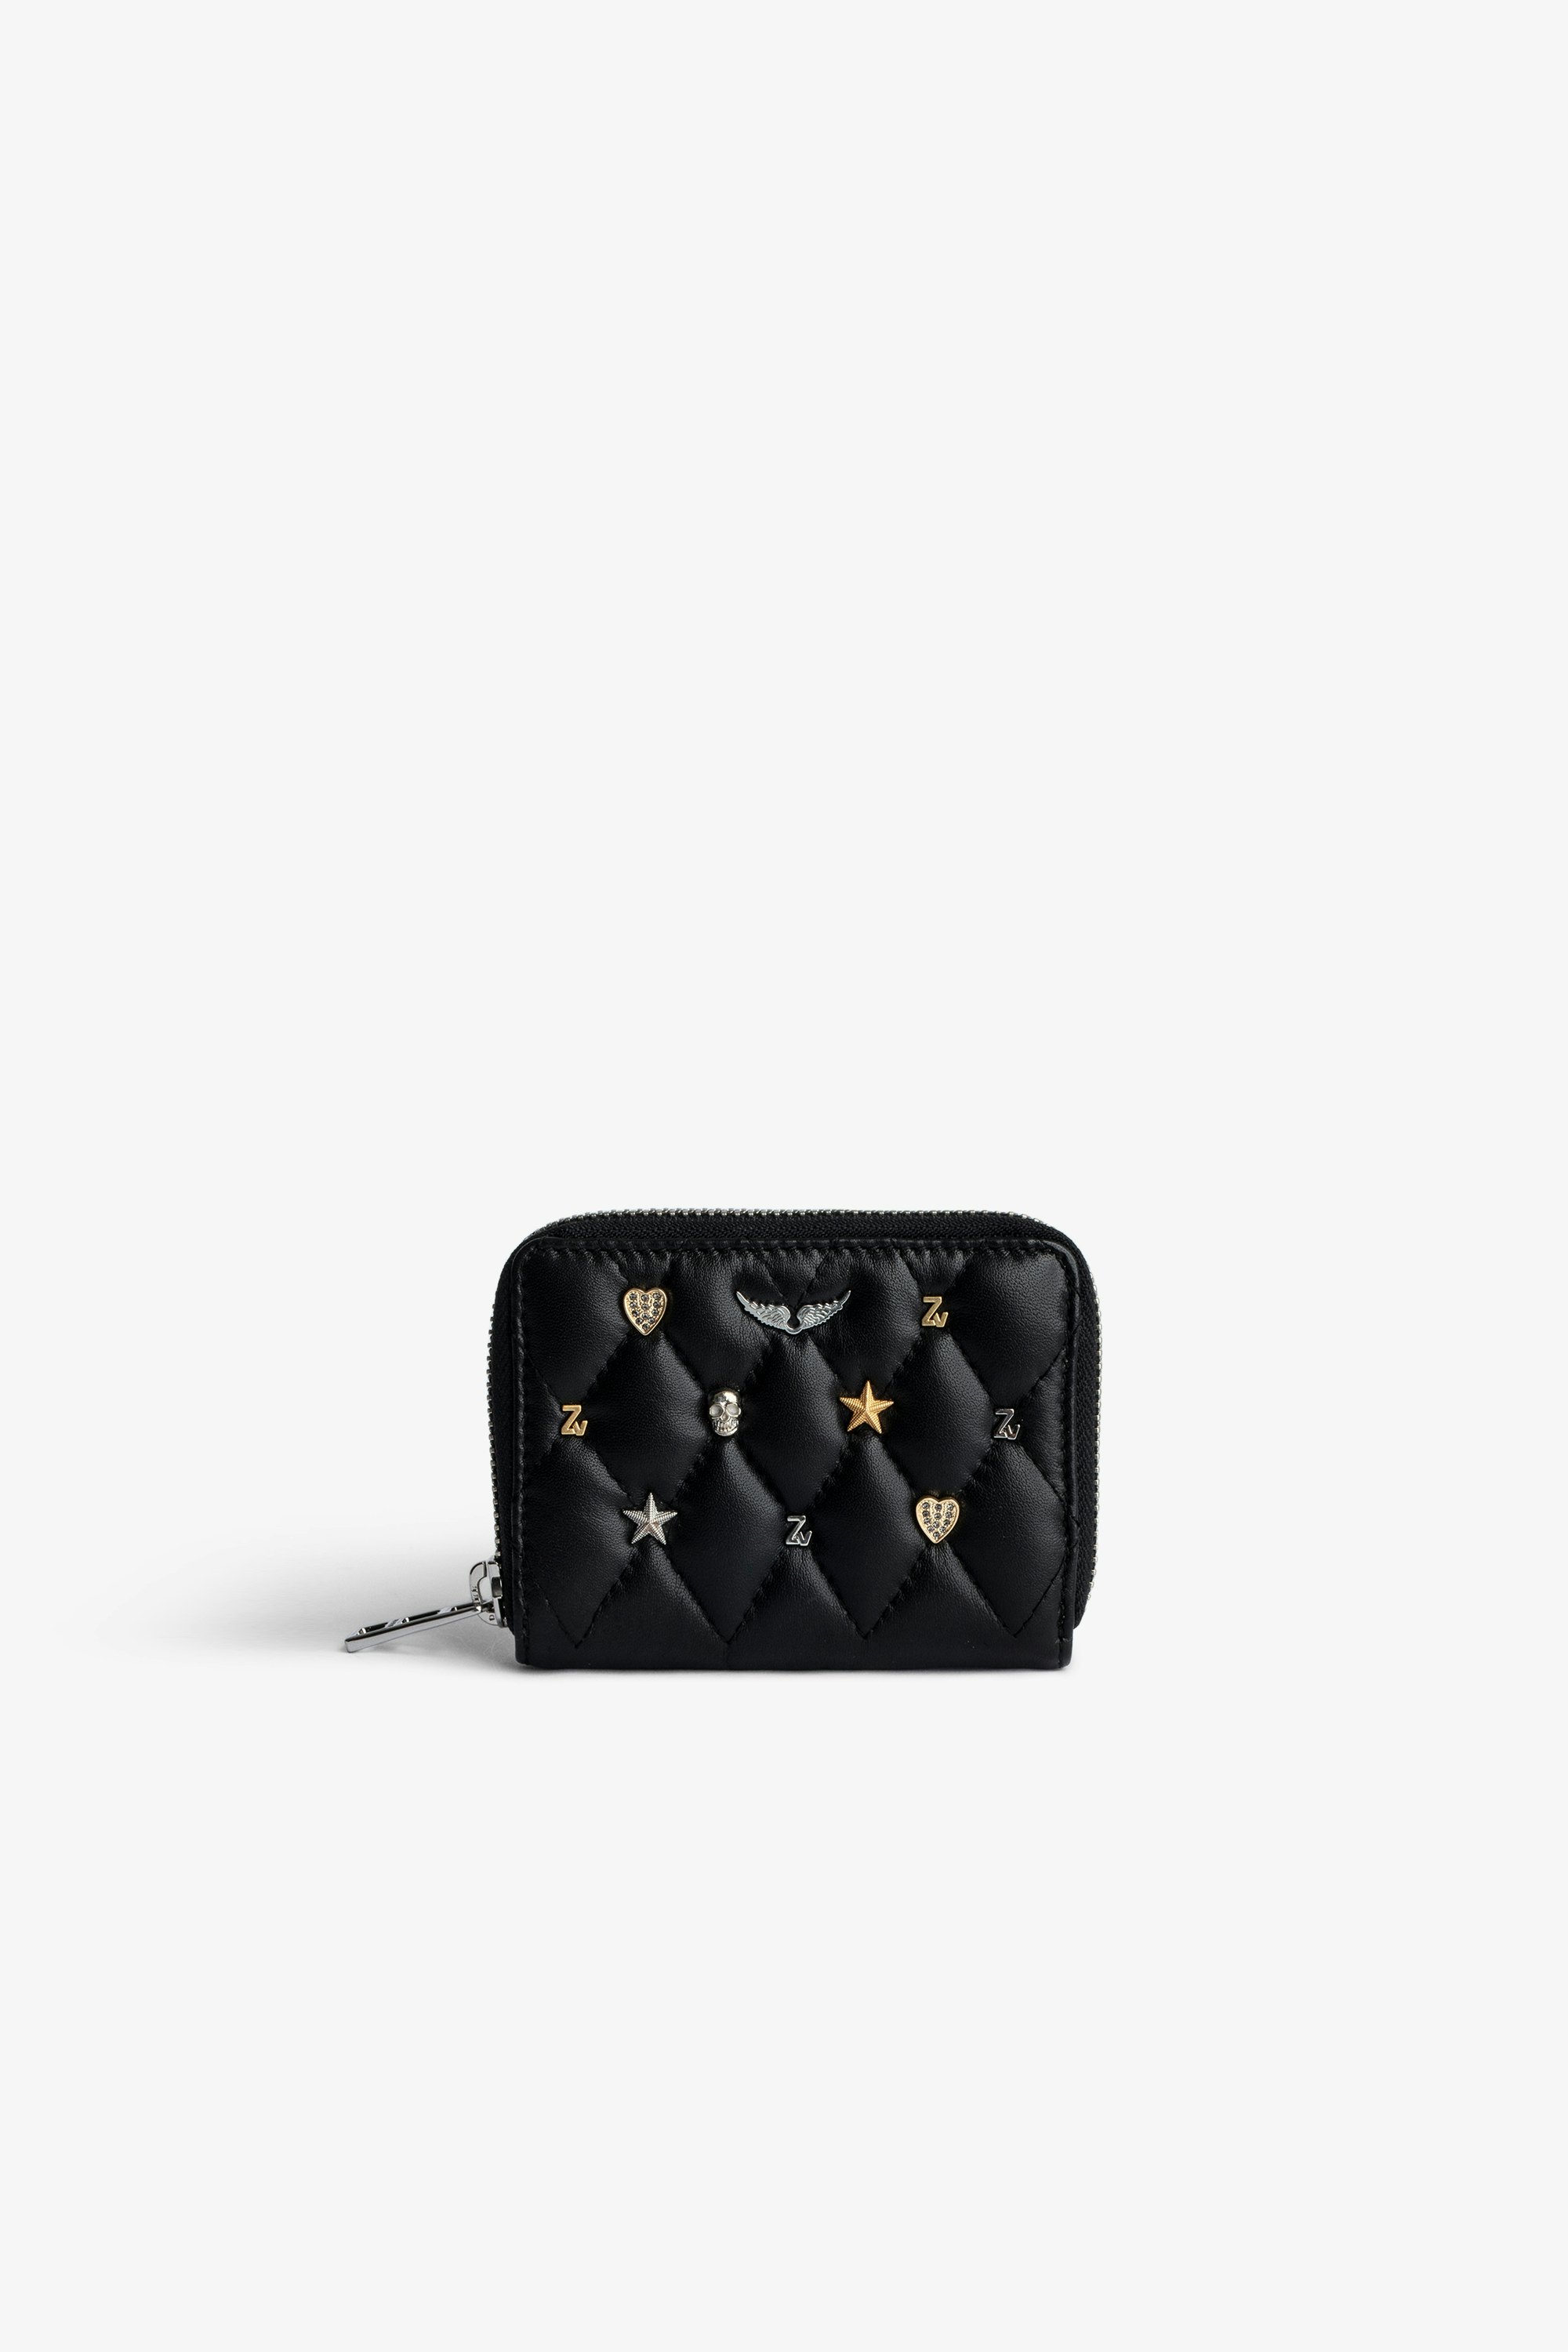 Mini ZV Coin Purse Women’s black quilted leather coin purse with silver- and gold-tone charms